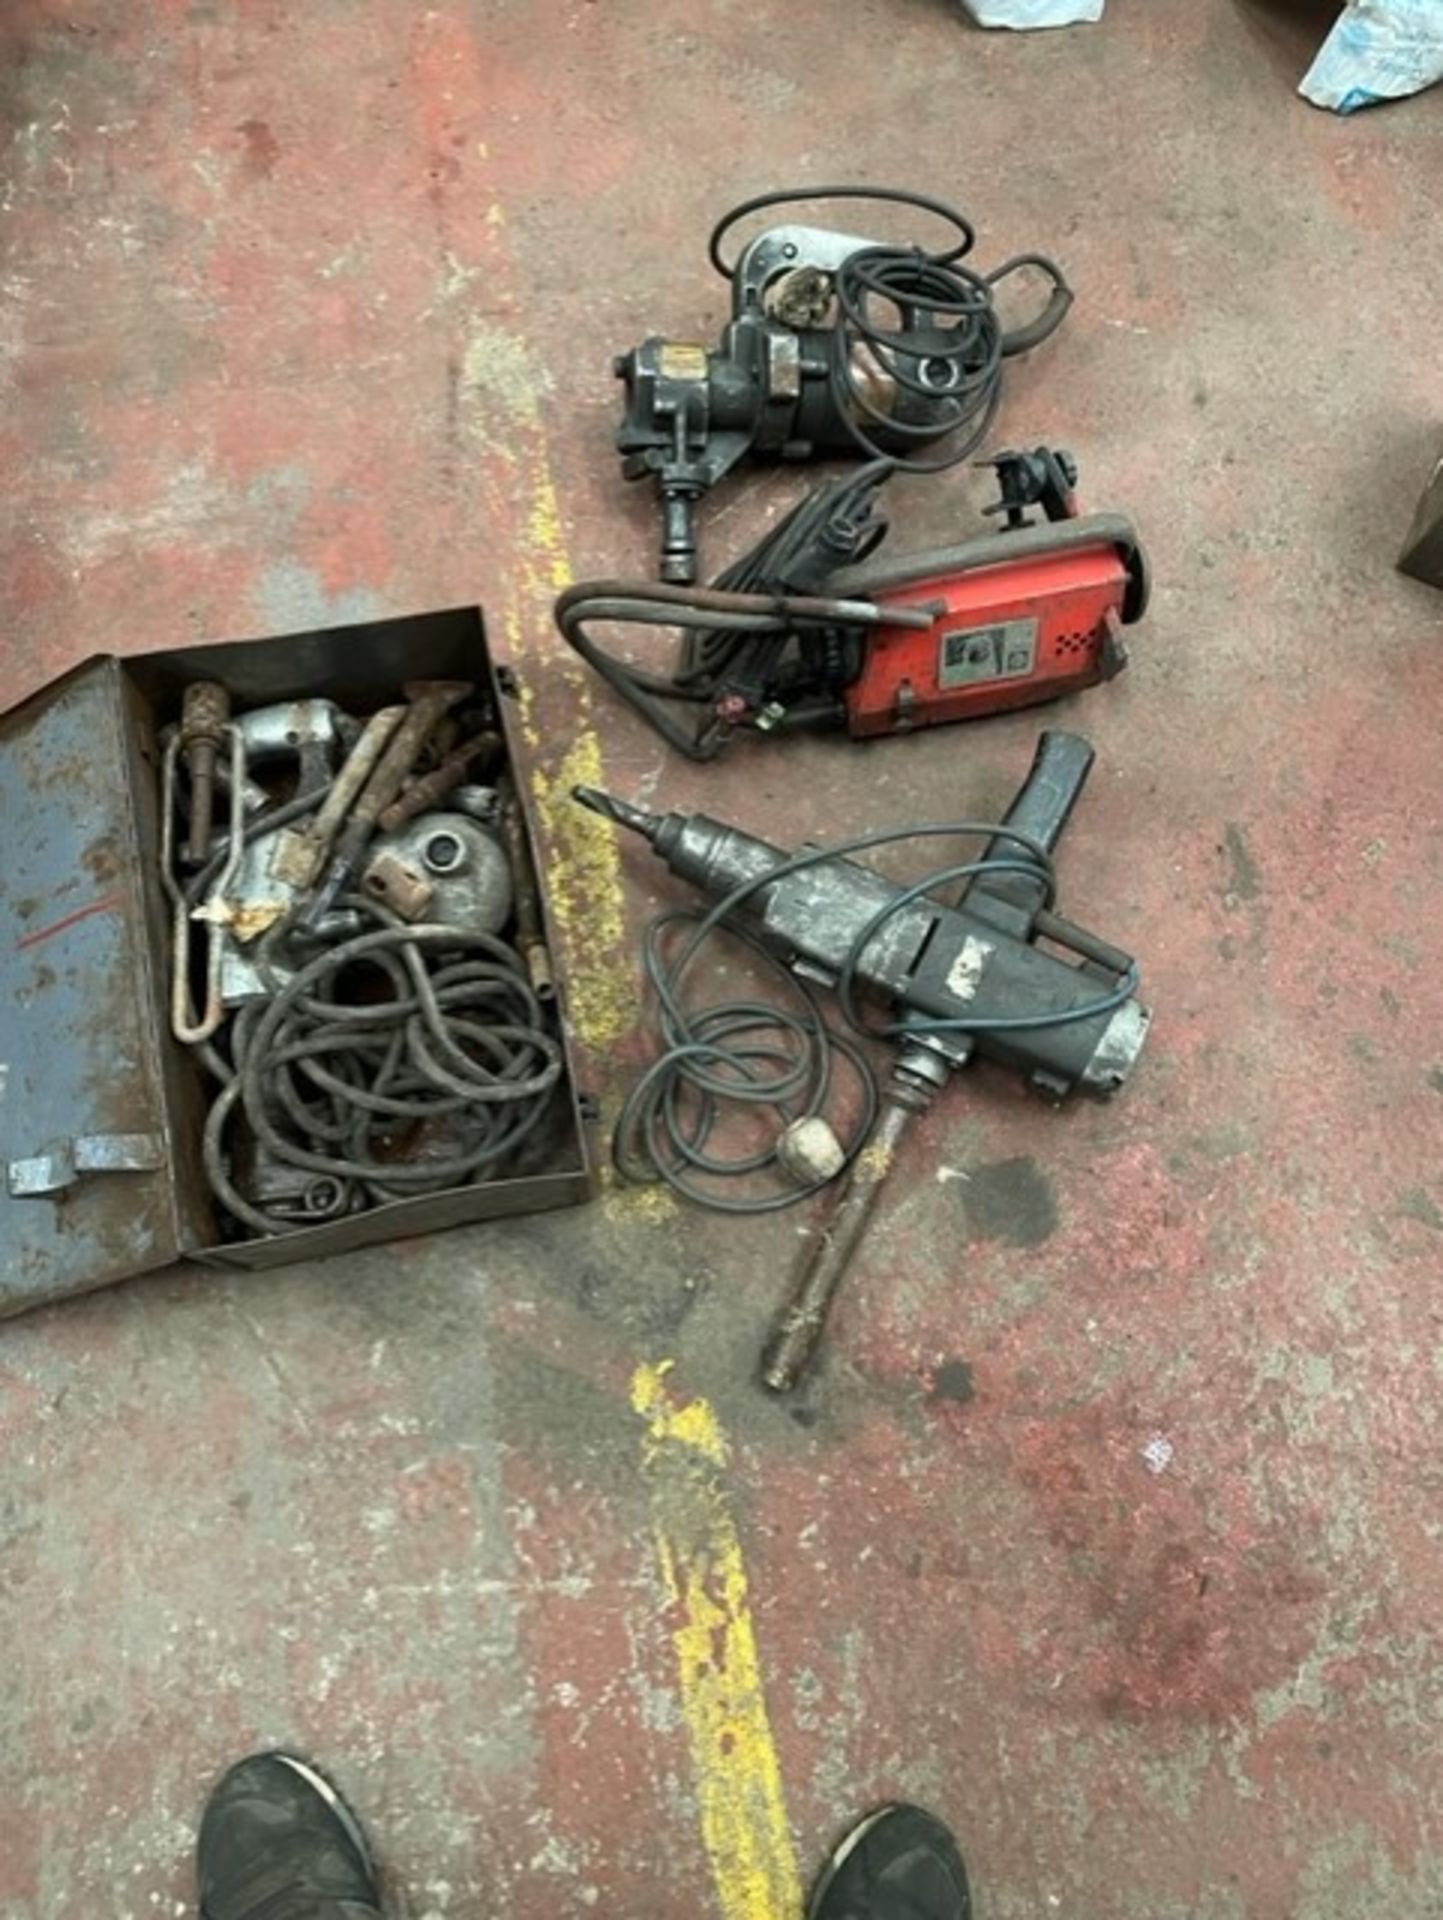 Very old 240 volt bits of machinery don’t no if valuable or scrap